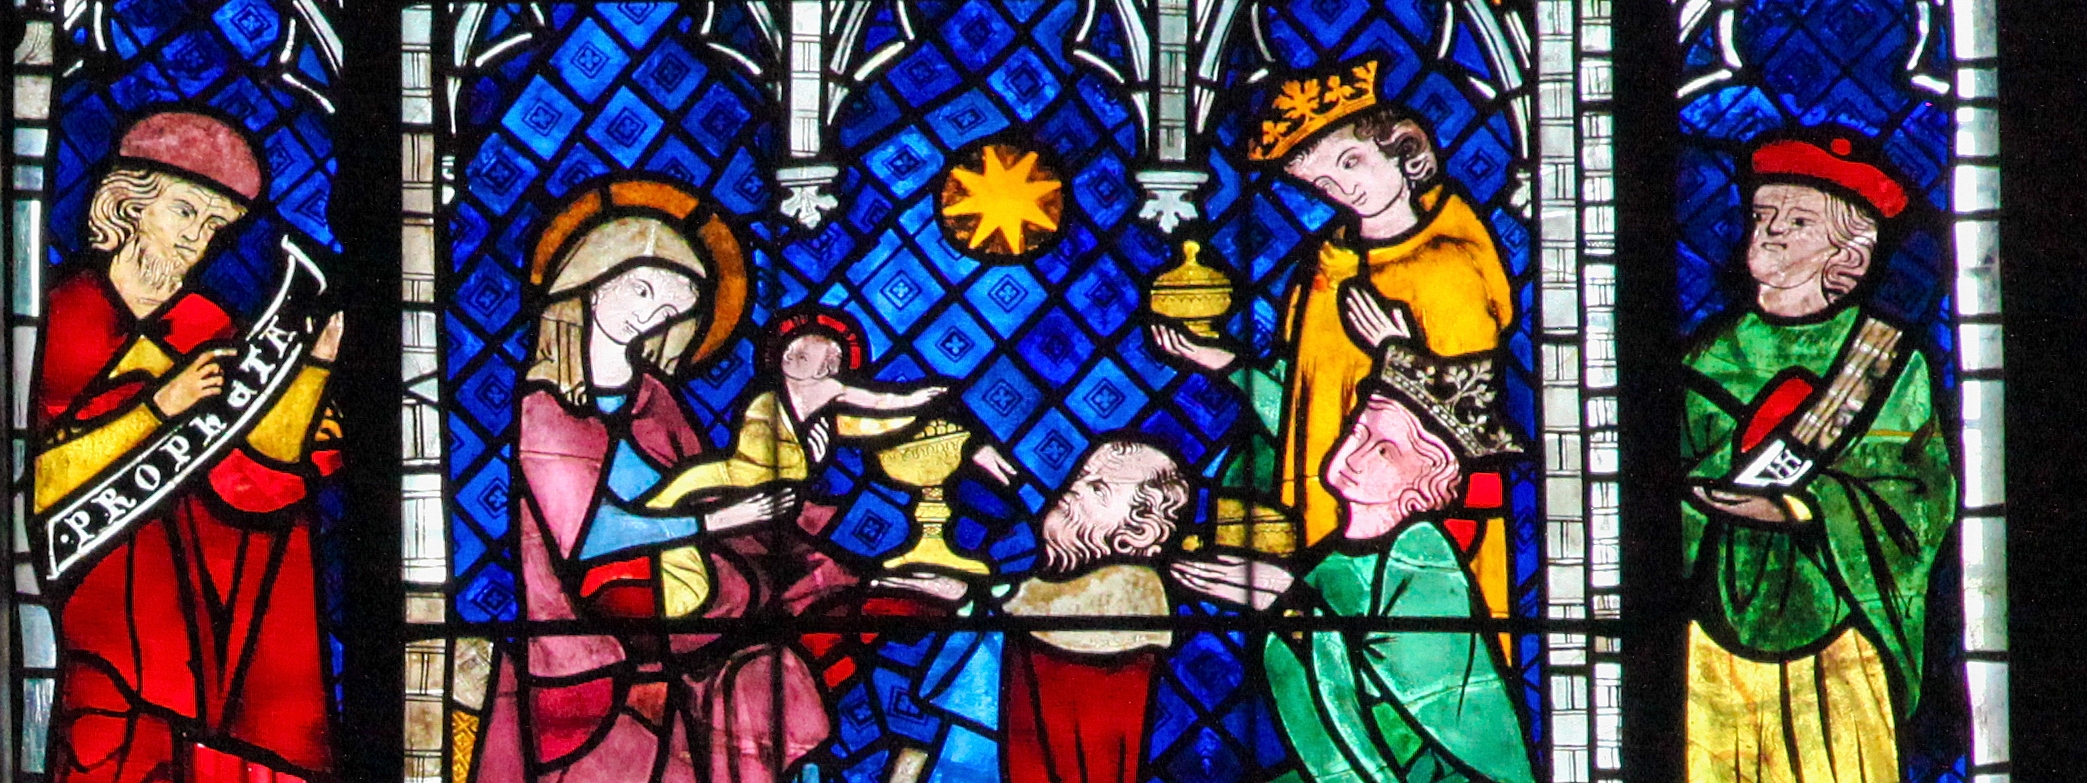 a stained glass art of the Adoration of the Magi in the cathedral of Strasbourg, France